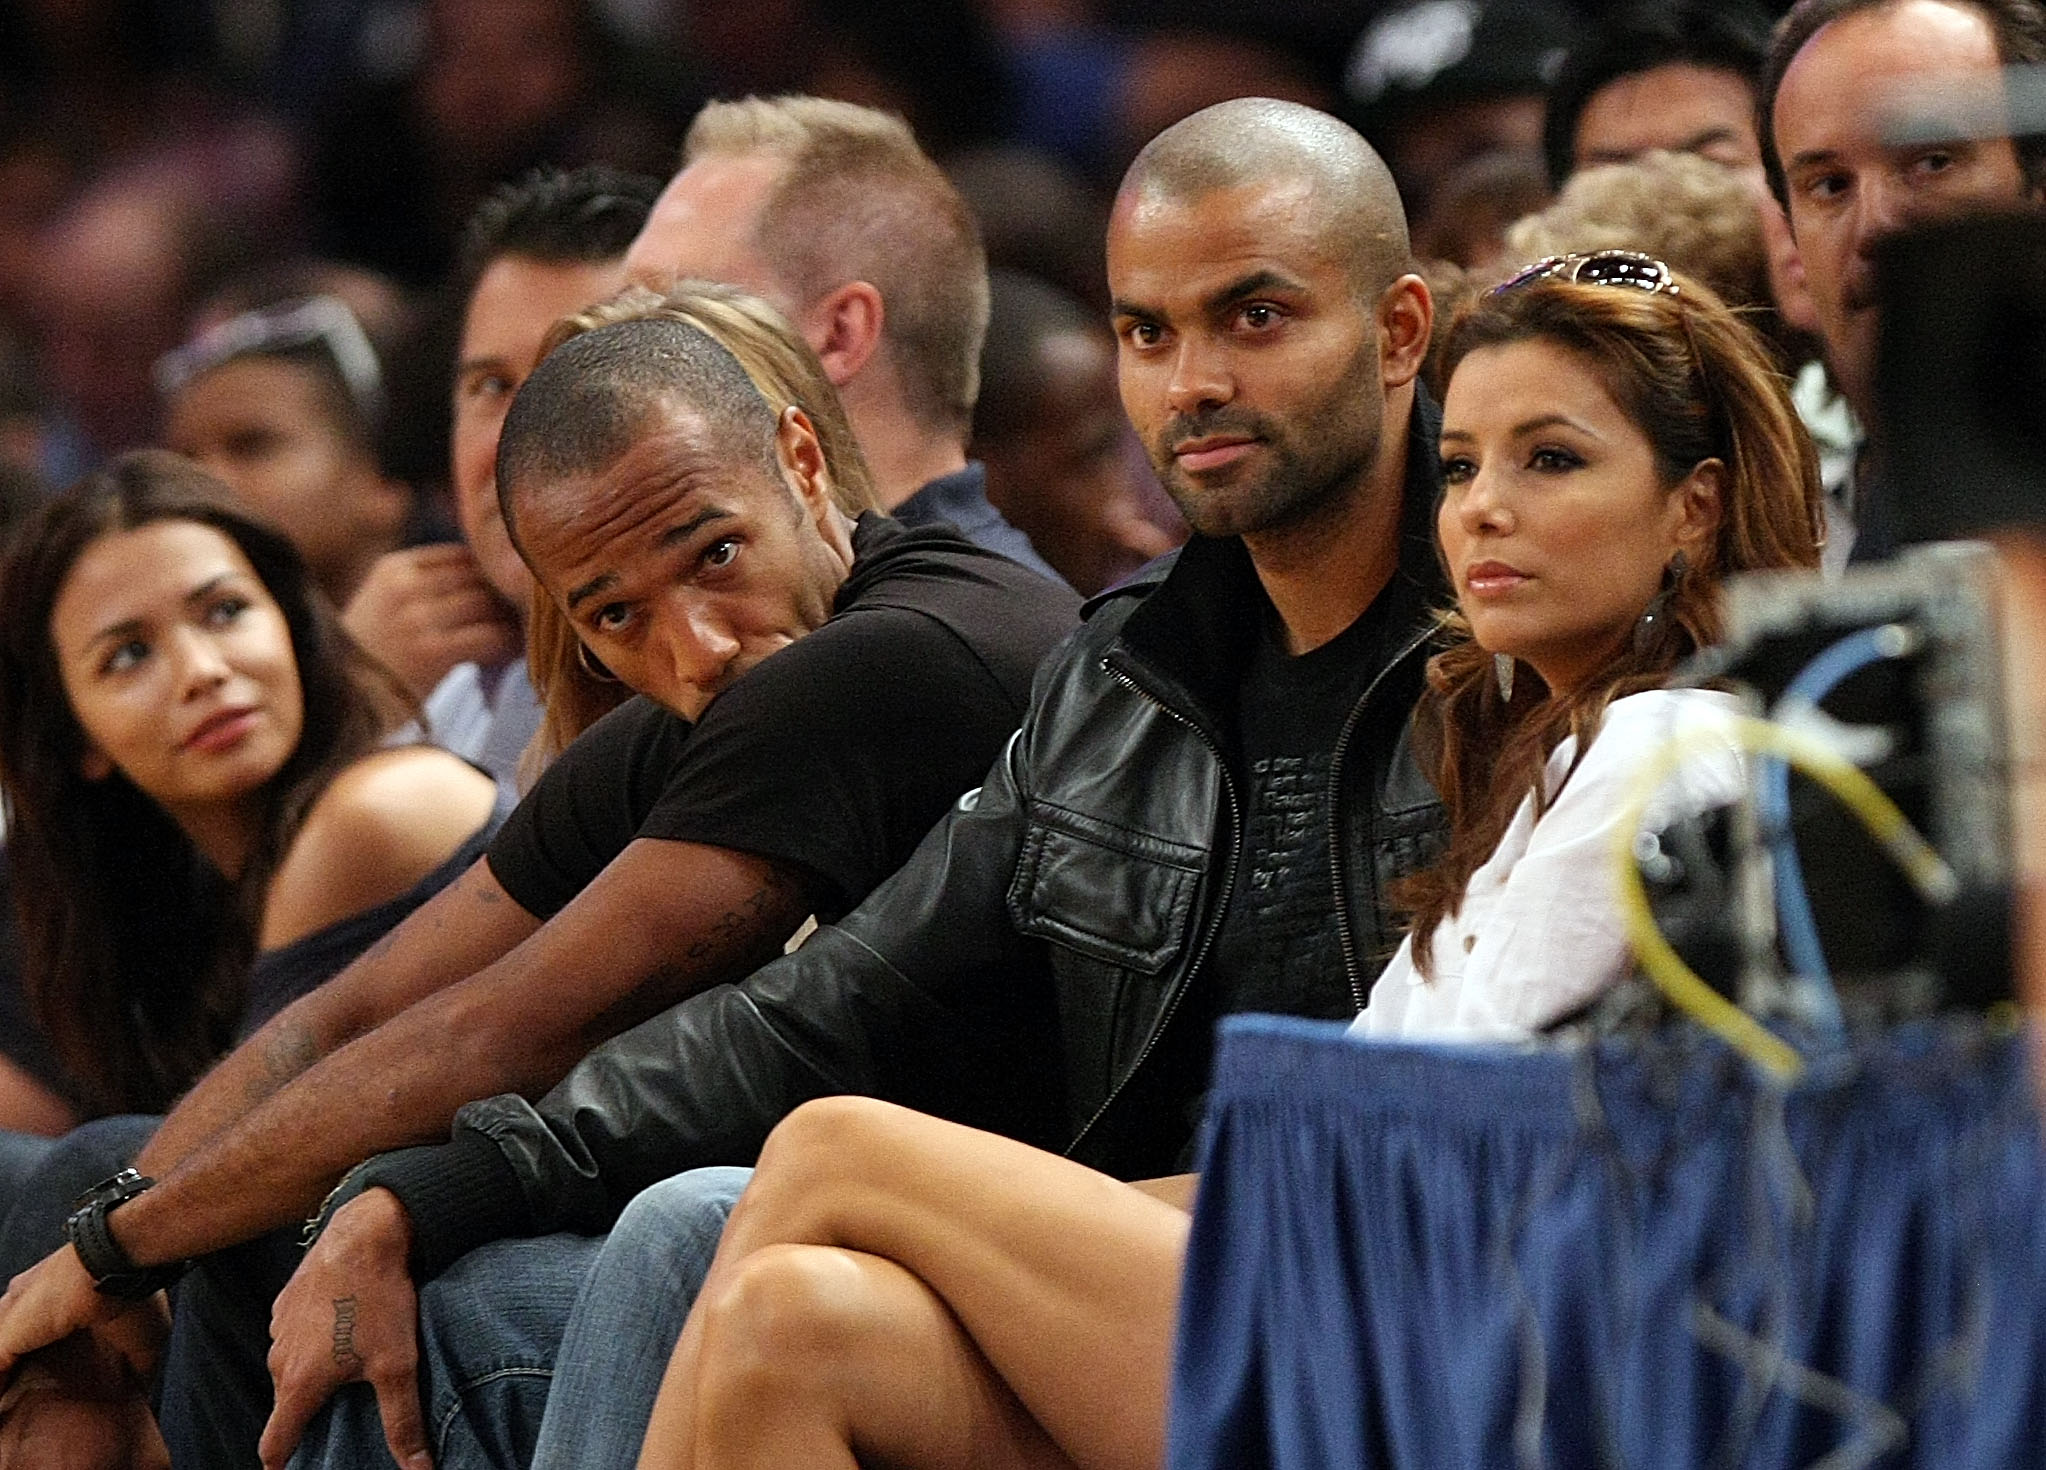 NEW YORK - AUGUST 15: Thierry Henry, Tony Parker and Eva Longoria Parker watch on during the United States and France exhibition game as part of the World Basketball Festival at Madison Square Garden on August 15, 2010 in New York City.  (Photo by Nick La